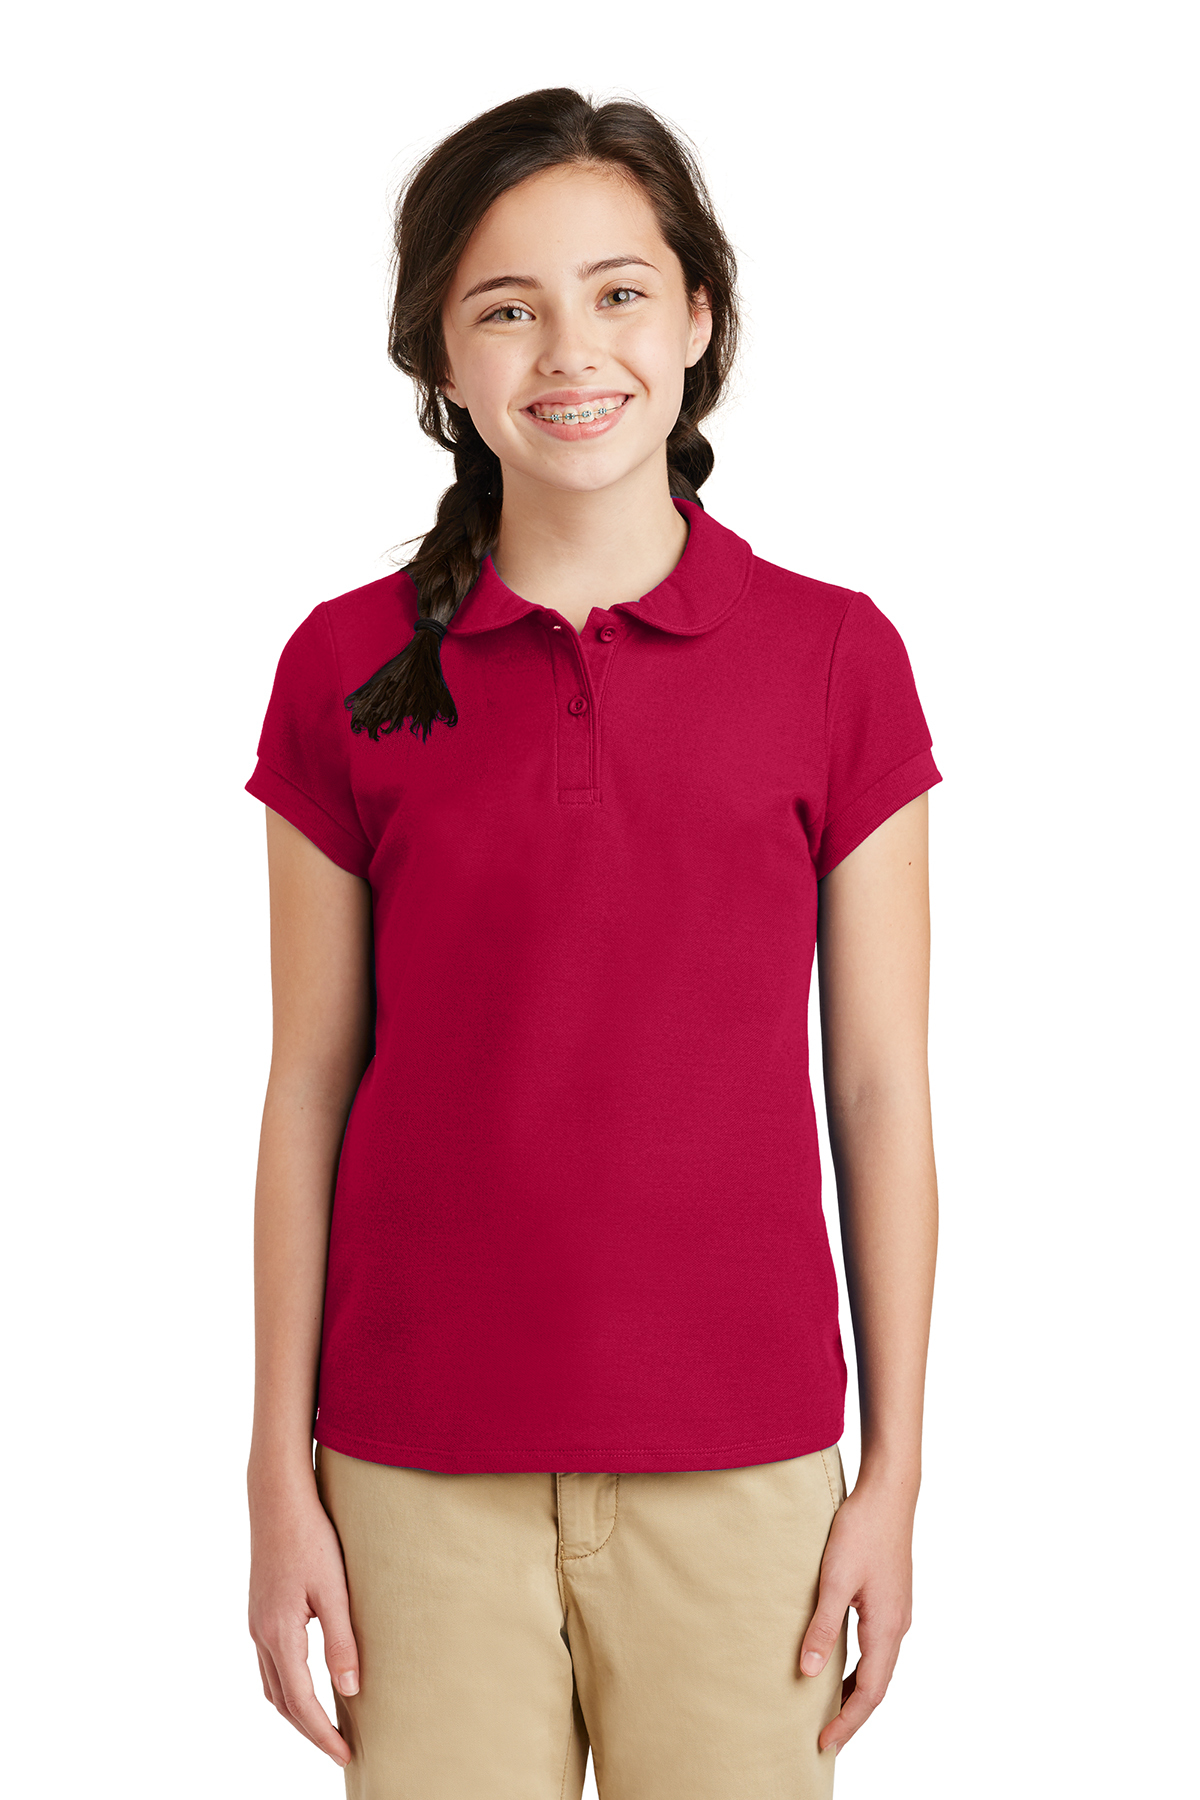 Port Authority YG503 Girls Silk Touch Peter Pan Collar Polo 